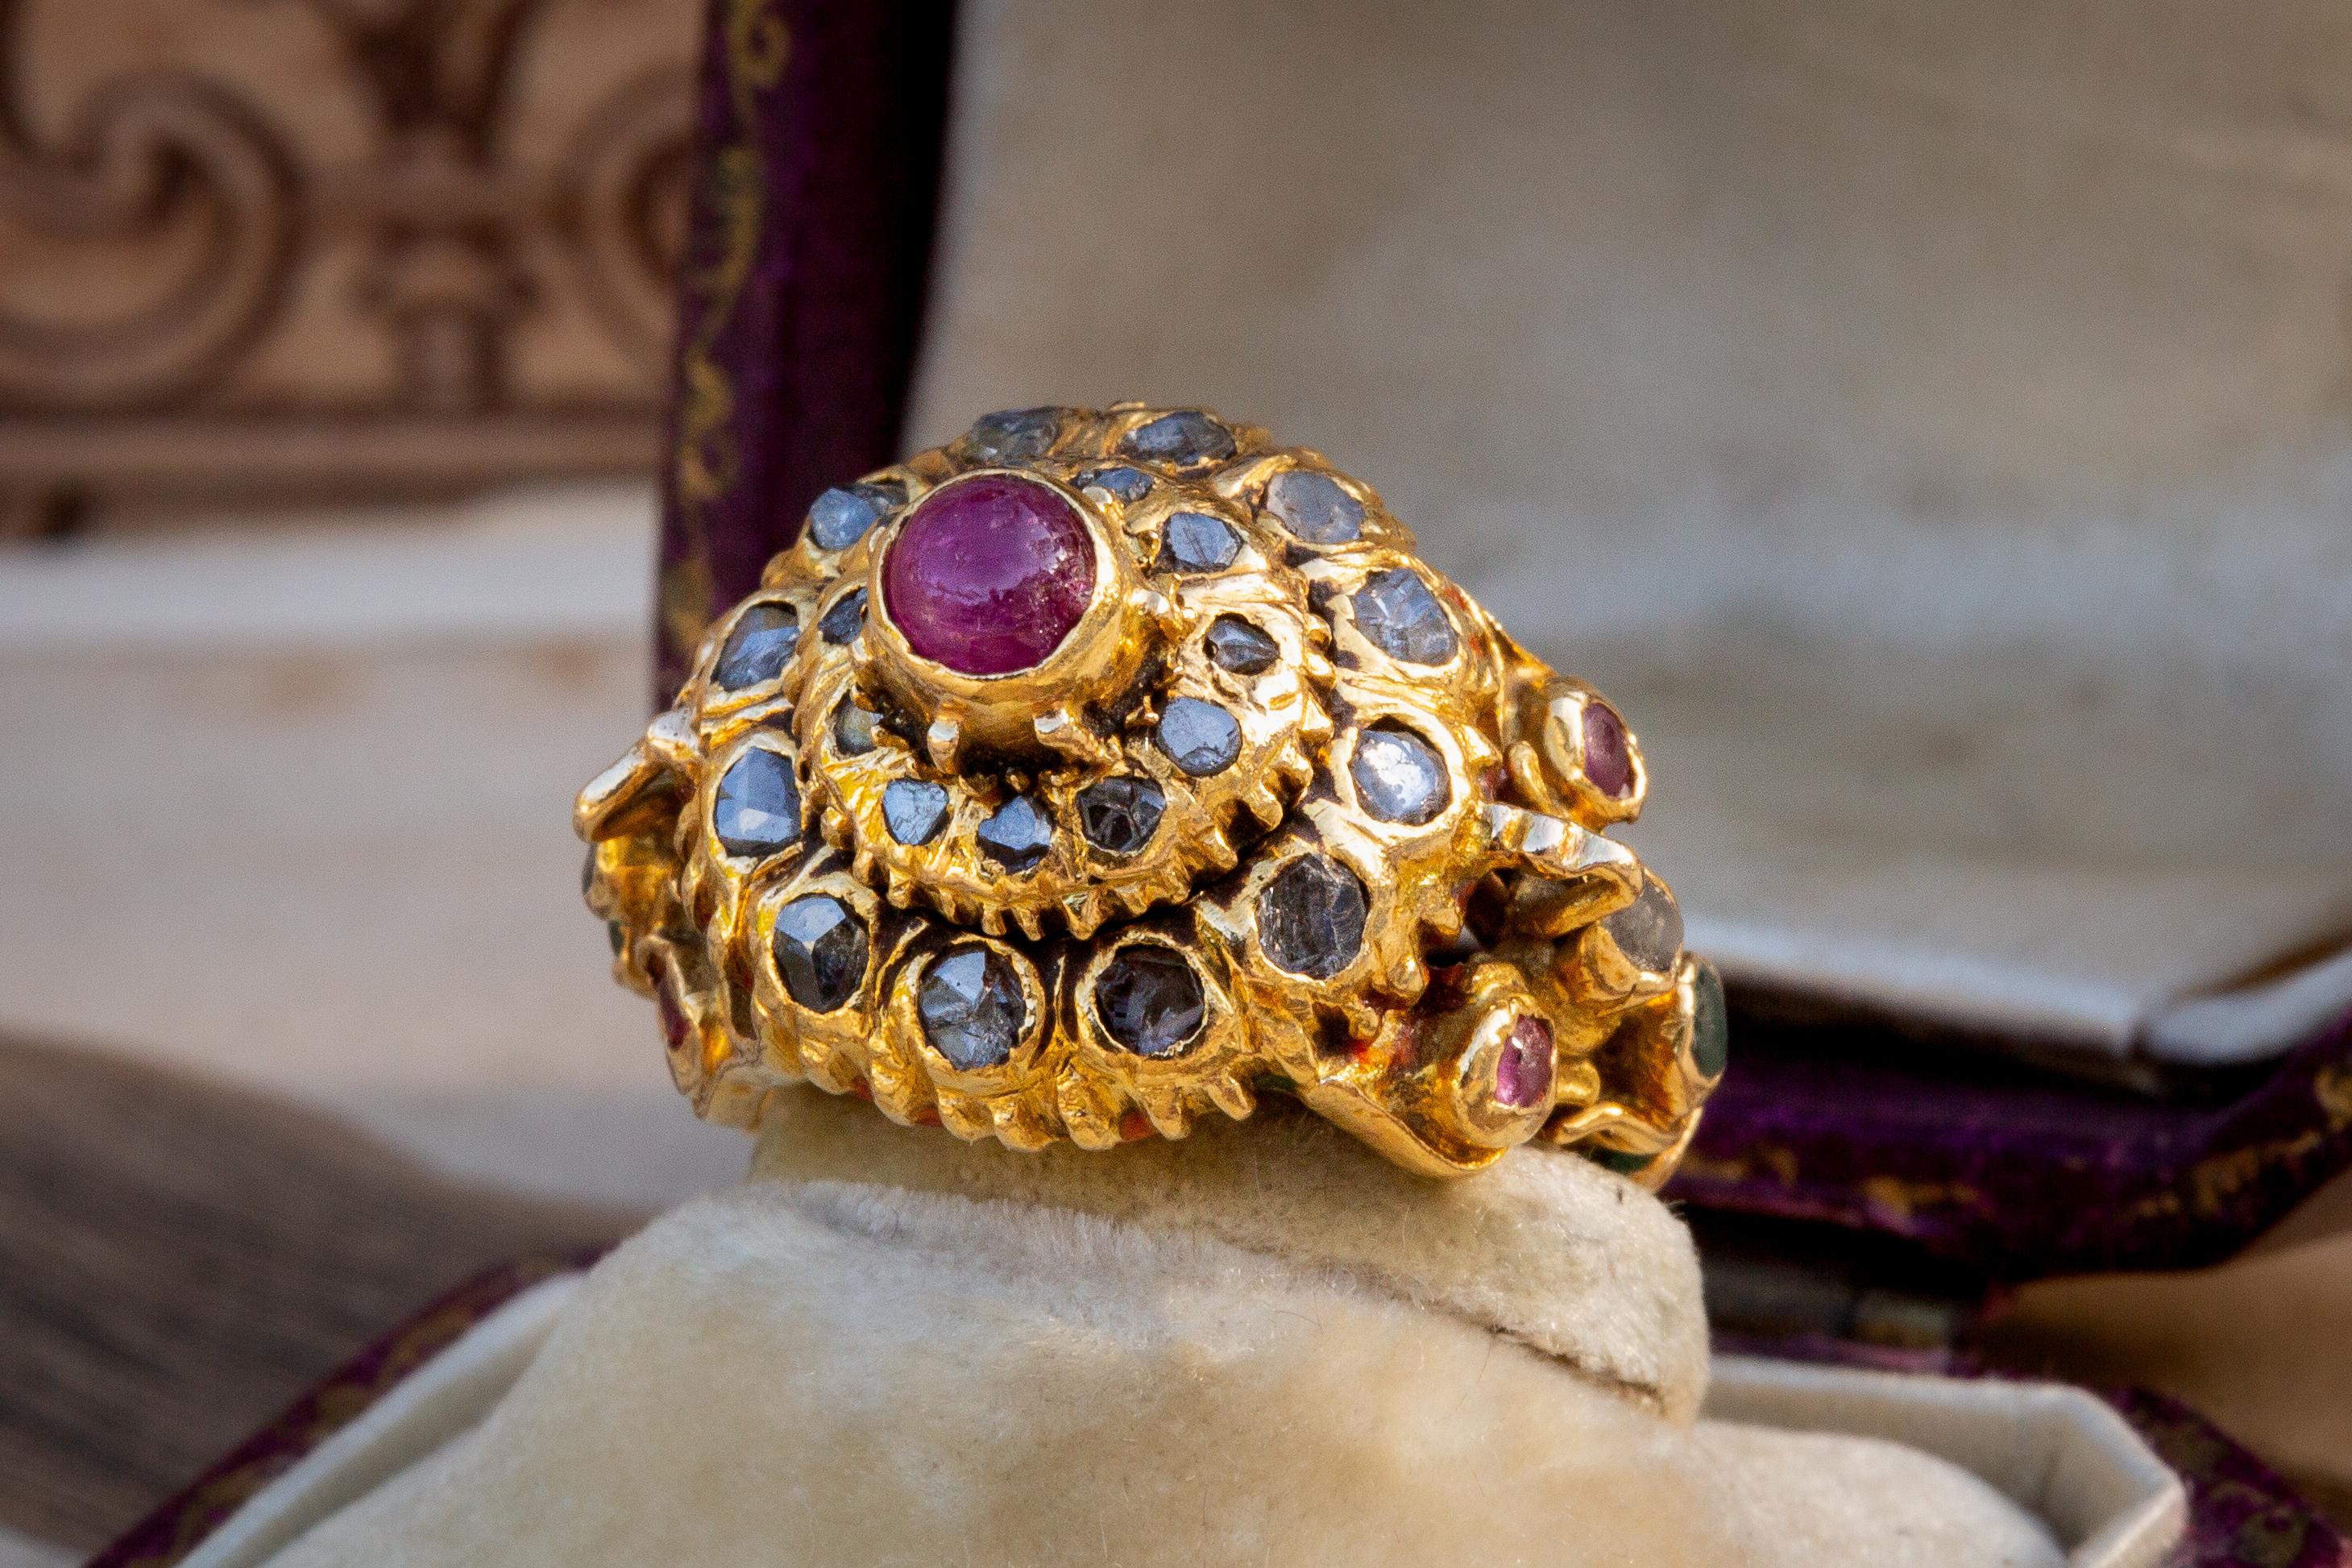 This incredibly ornate piece was made in Siam during the late Ayutthaya or early Rattanakosin Kingdom period. It dates to the late 18th and is a very rare example of a ceremonial ‘mondop’ or ‘pagoda’ ring. 

These rings were made for the monarchy